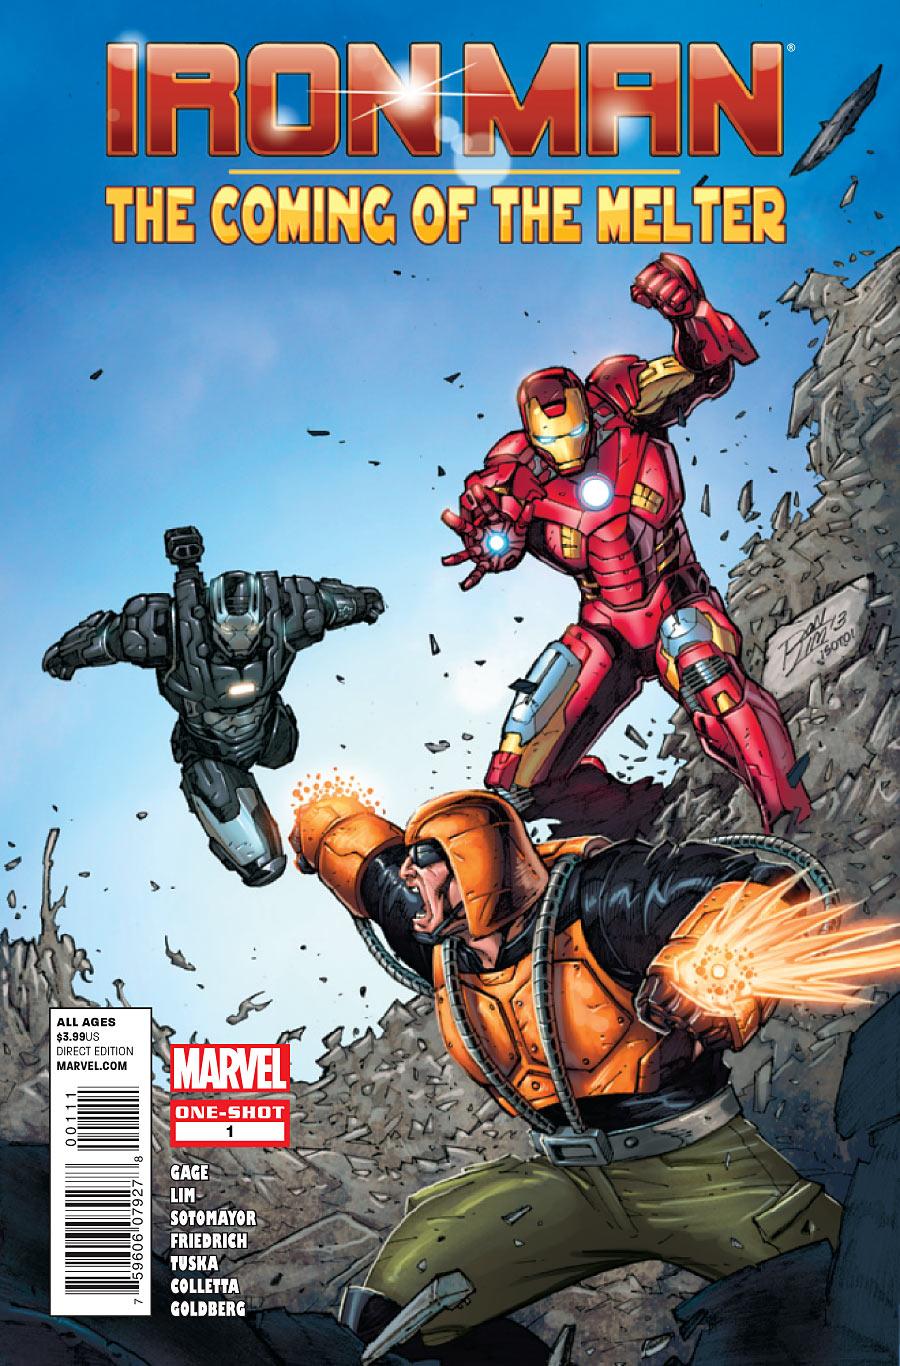 Iron Man: The Coming of the Melter Vol. 1 #1